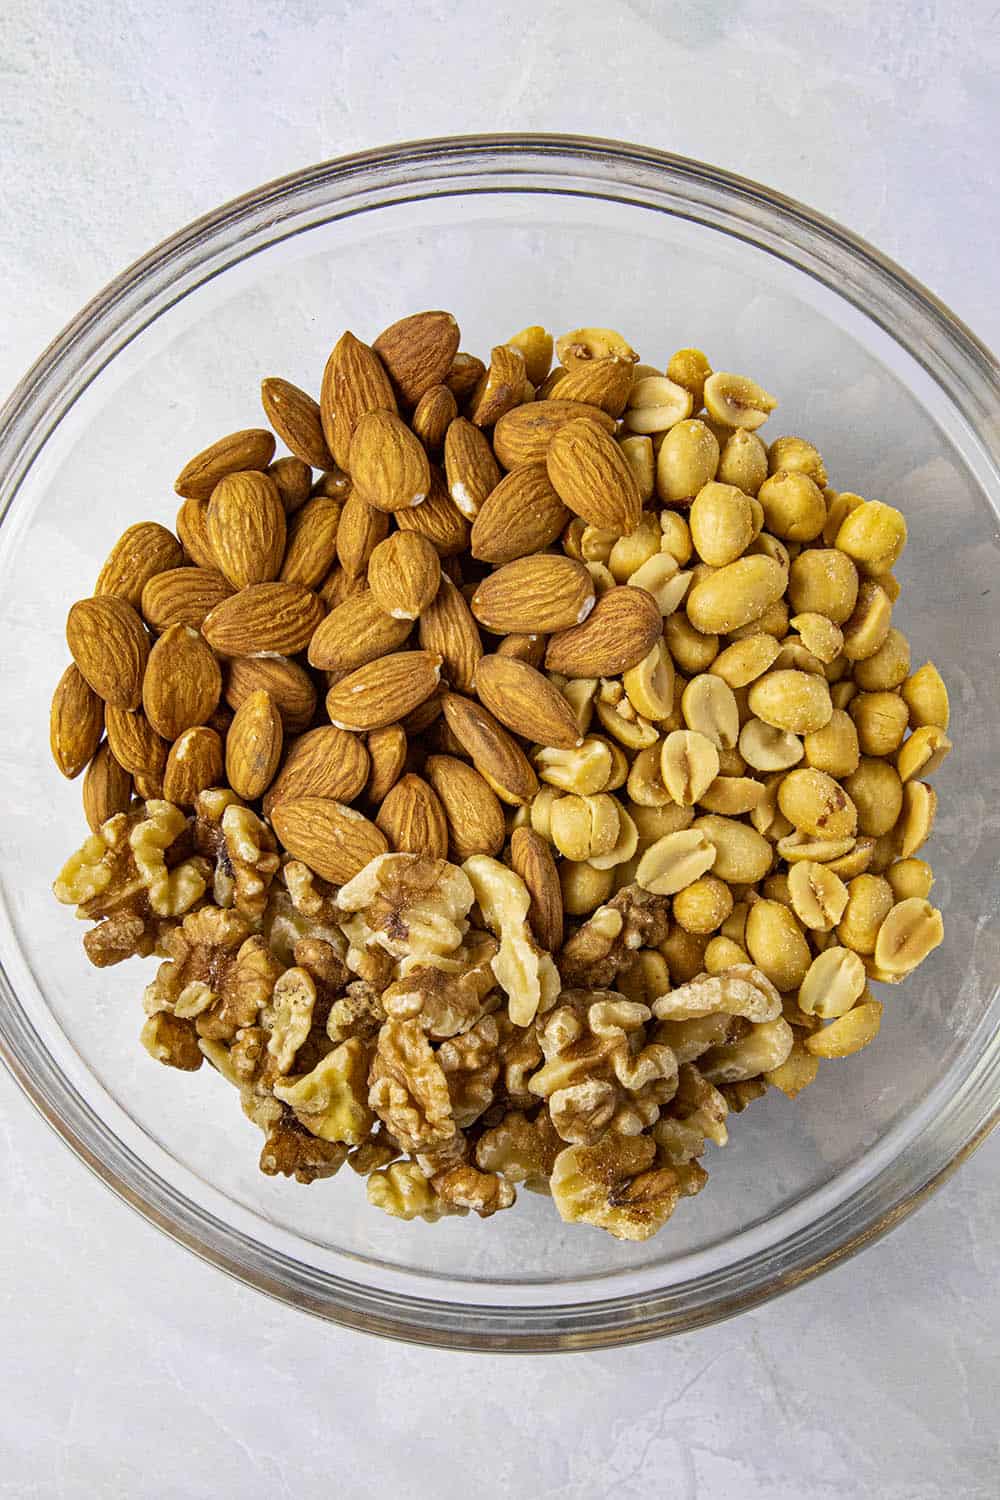 Raw pecans, almonds and peanuts for making spiced nuts